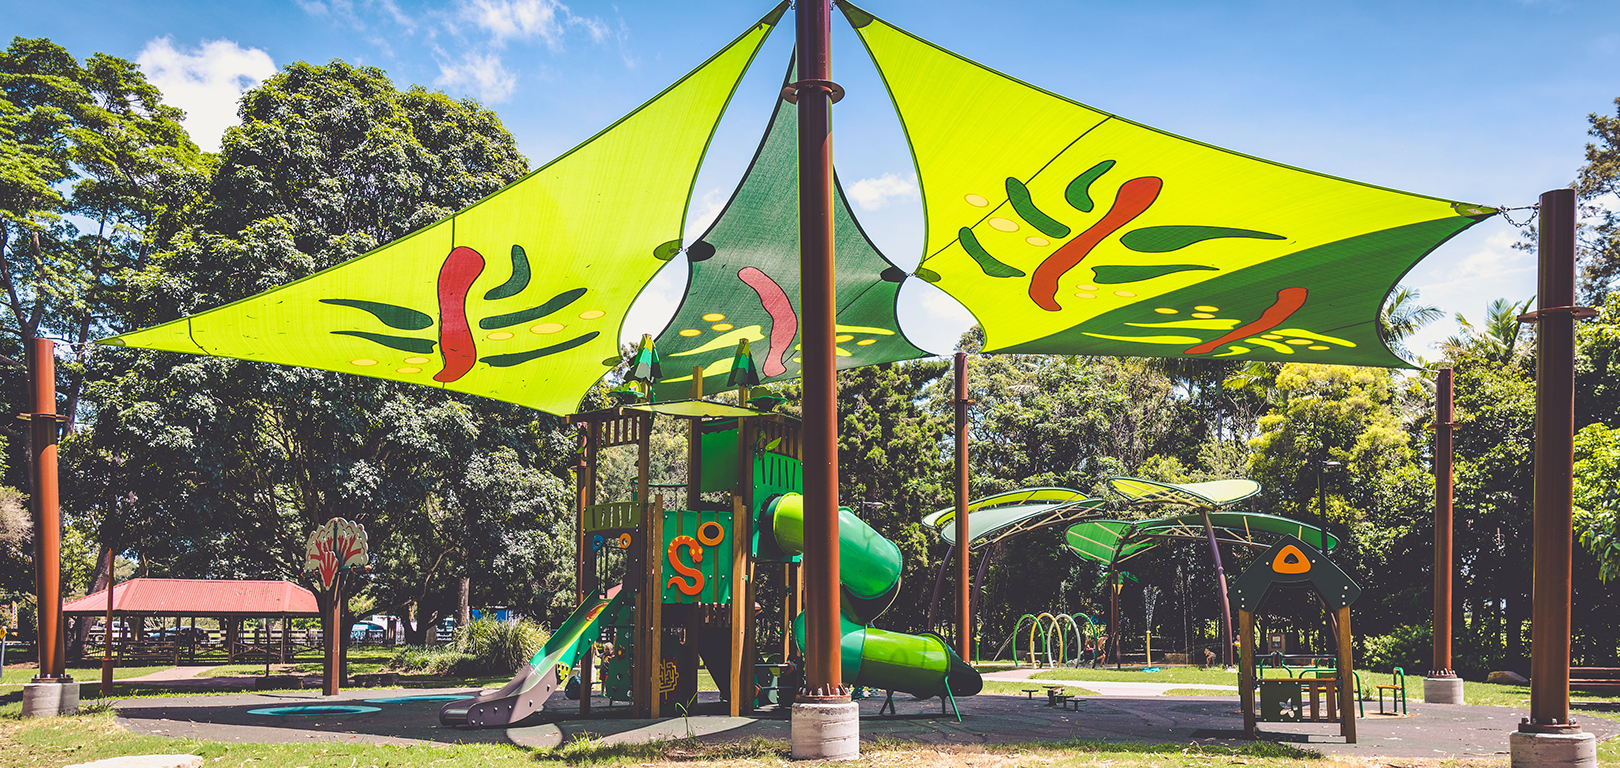 shade sails cover the playground